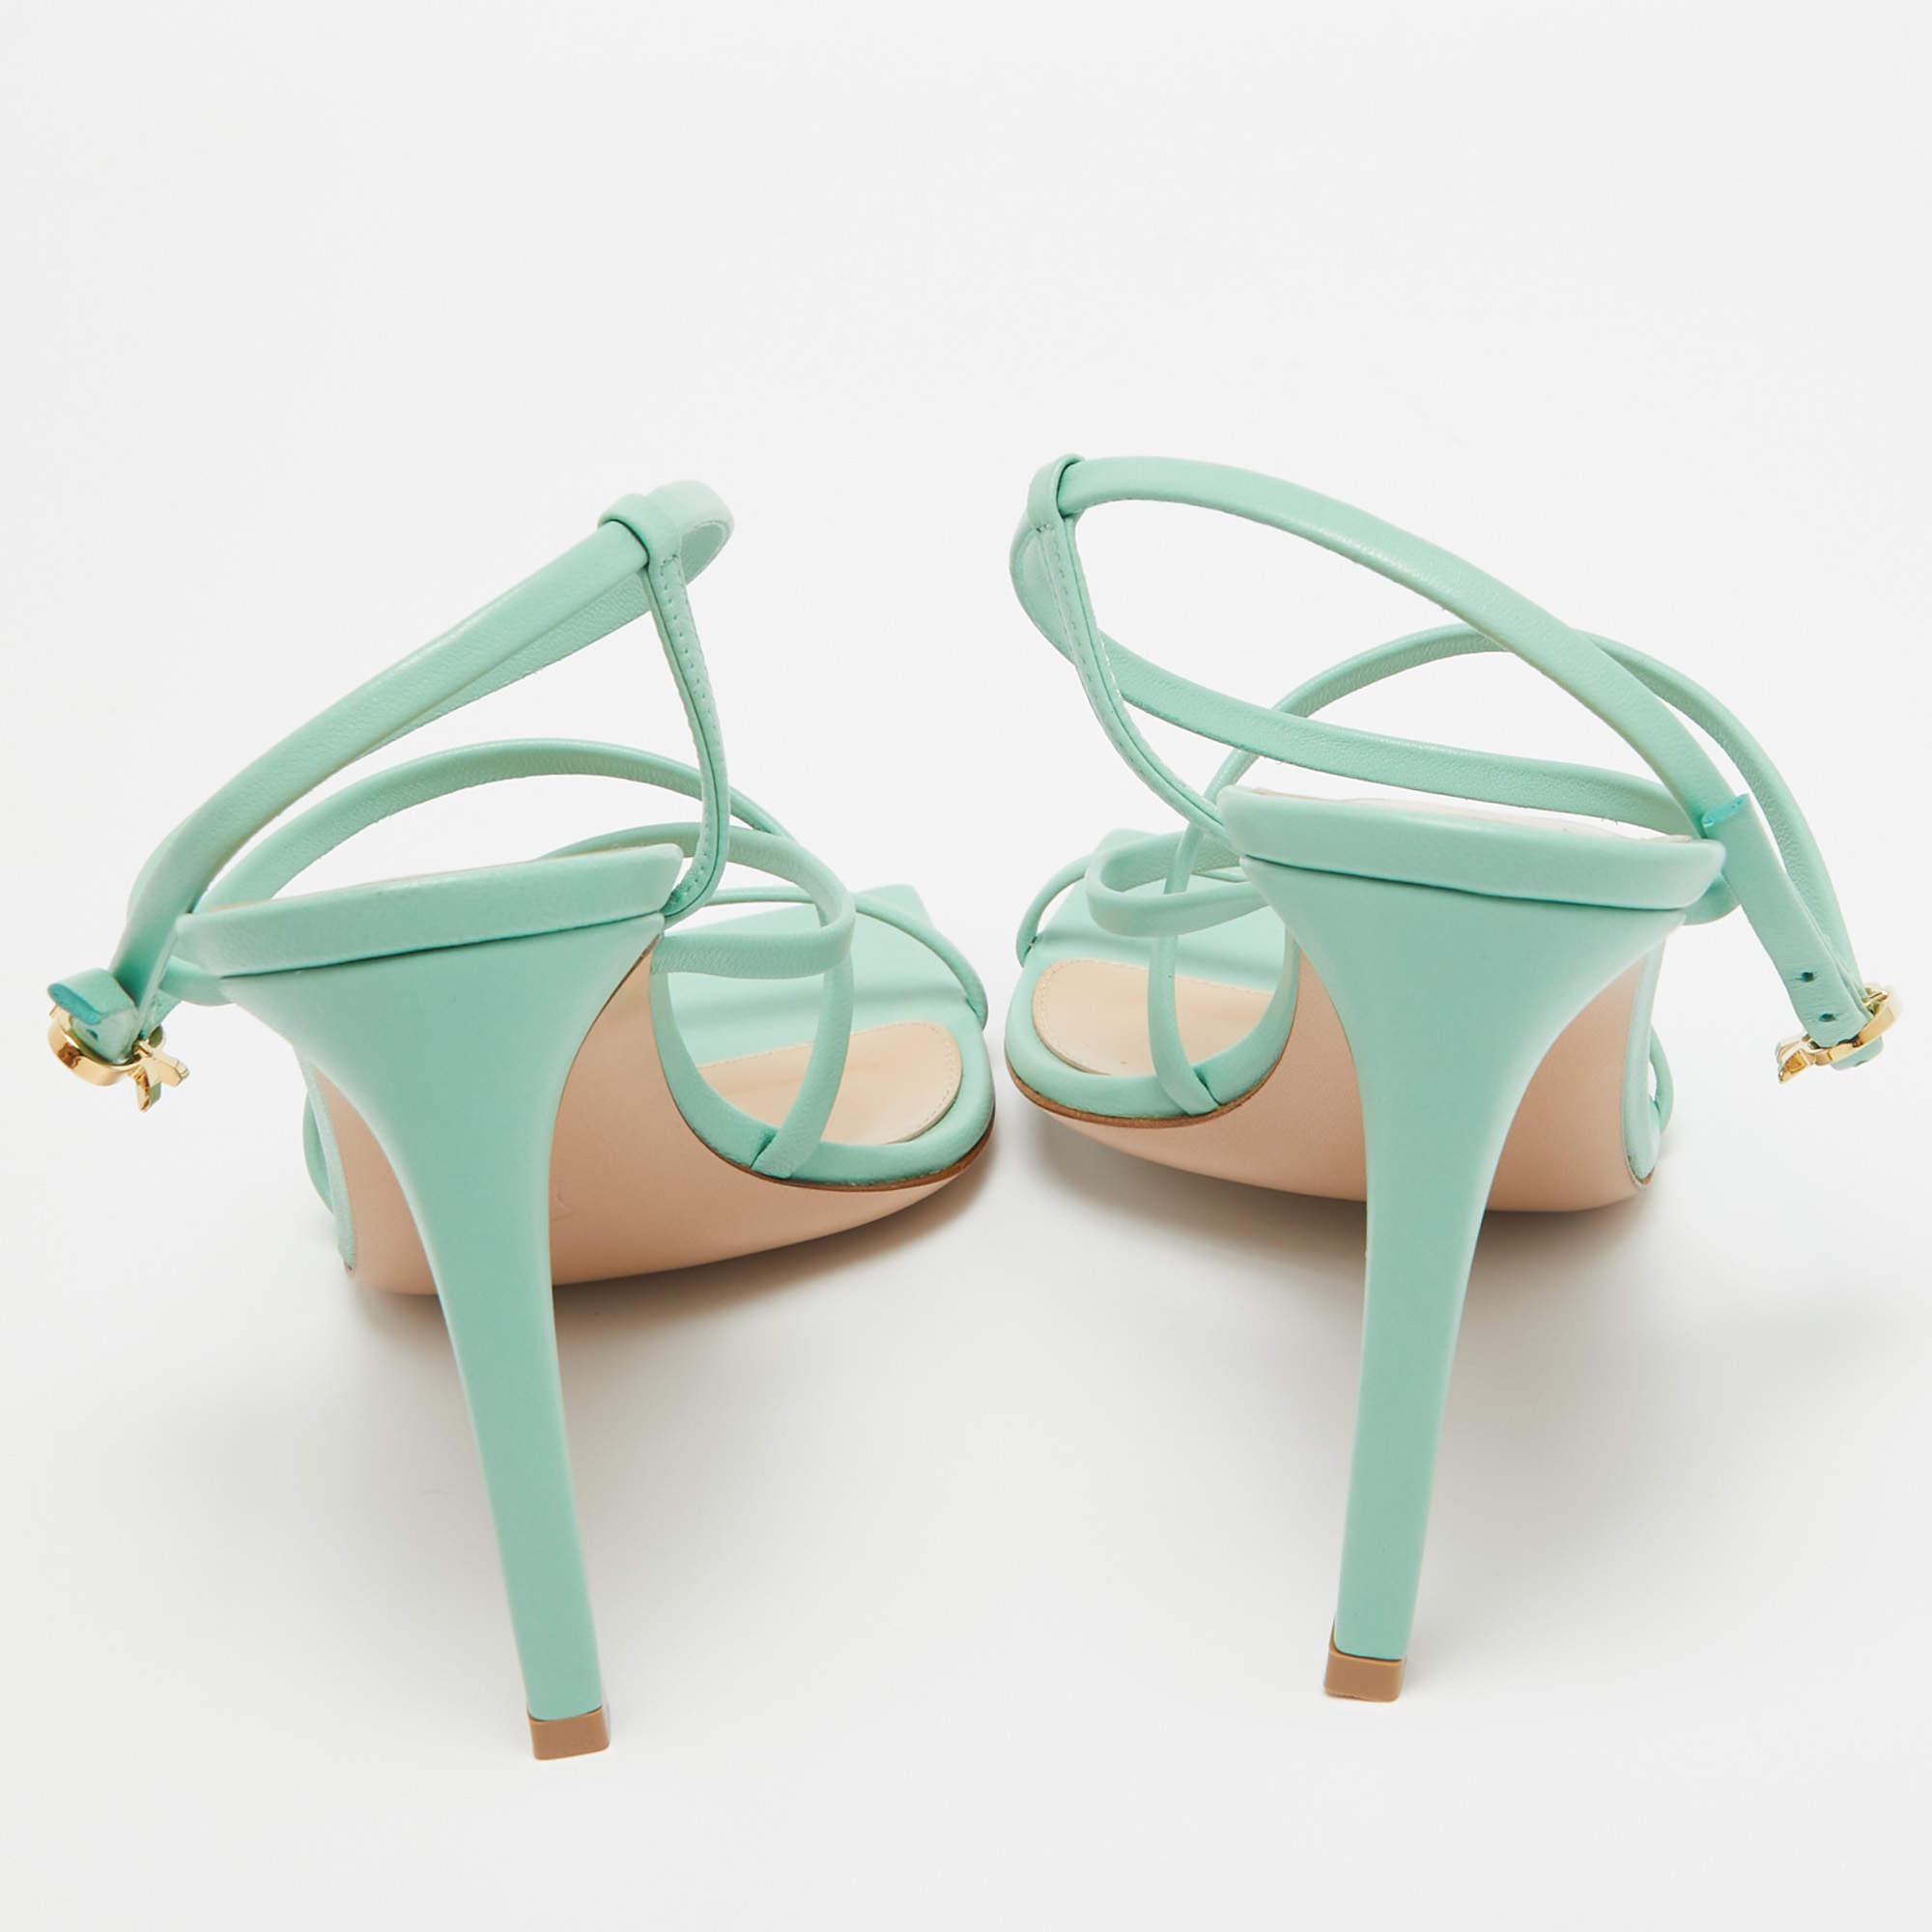 Gianvito Rossi Mint Green Leather Manilla Sandals Size 38.5 For Sale 1